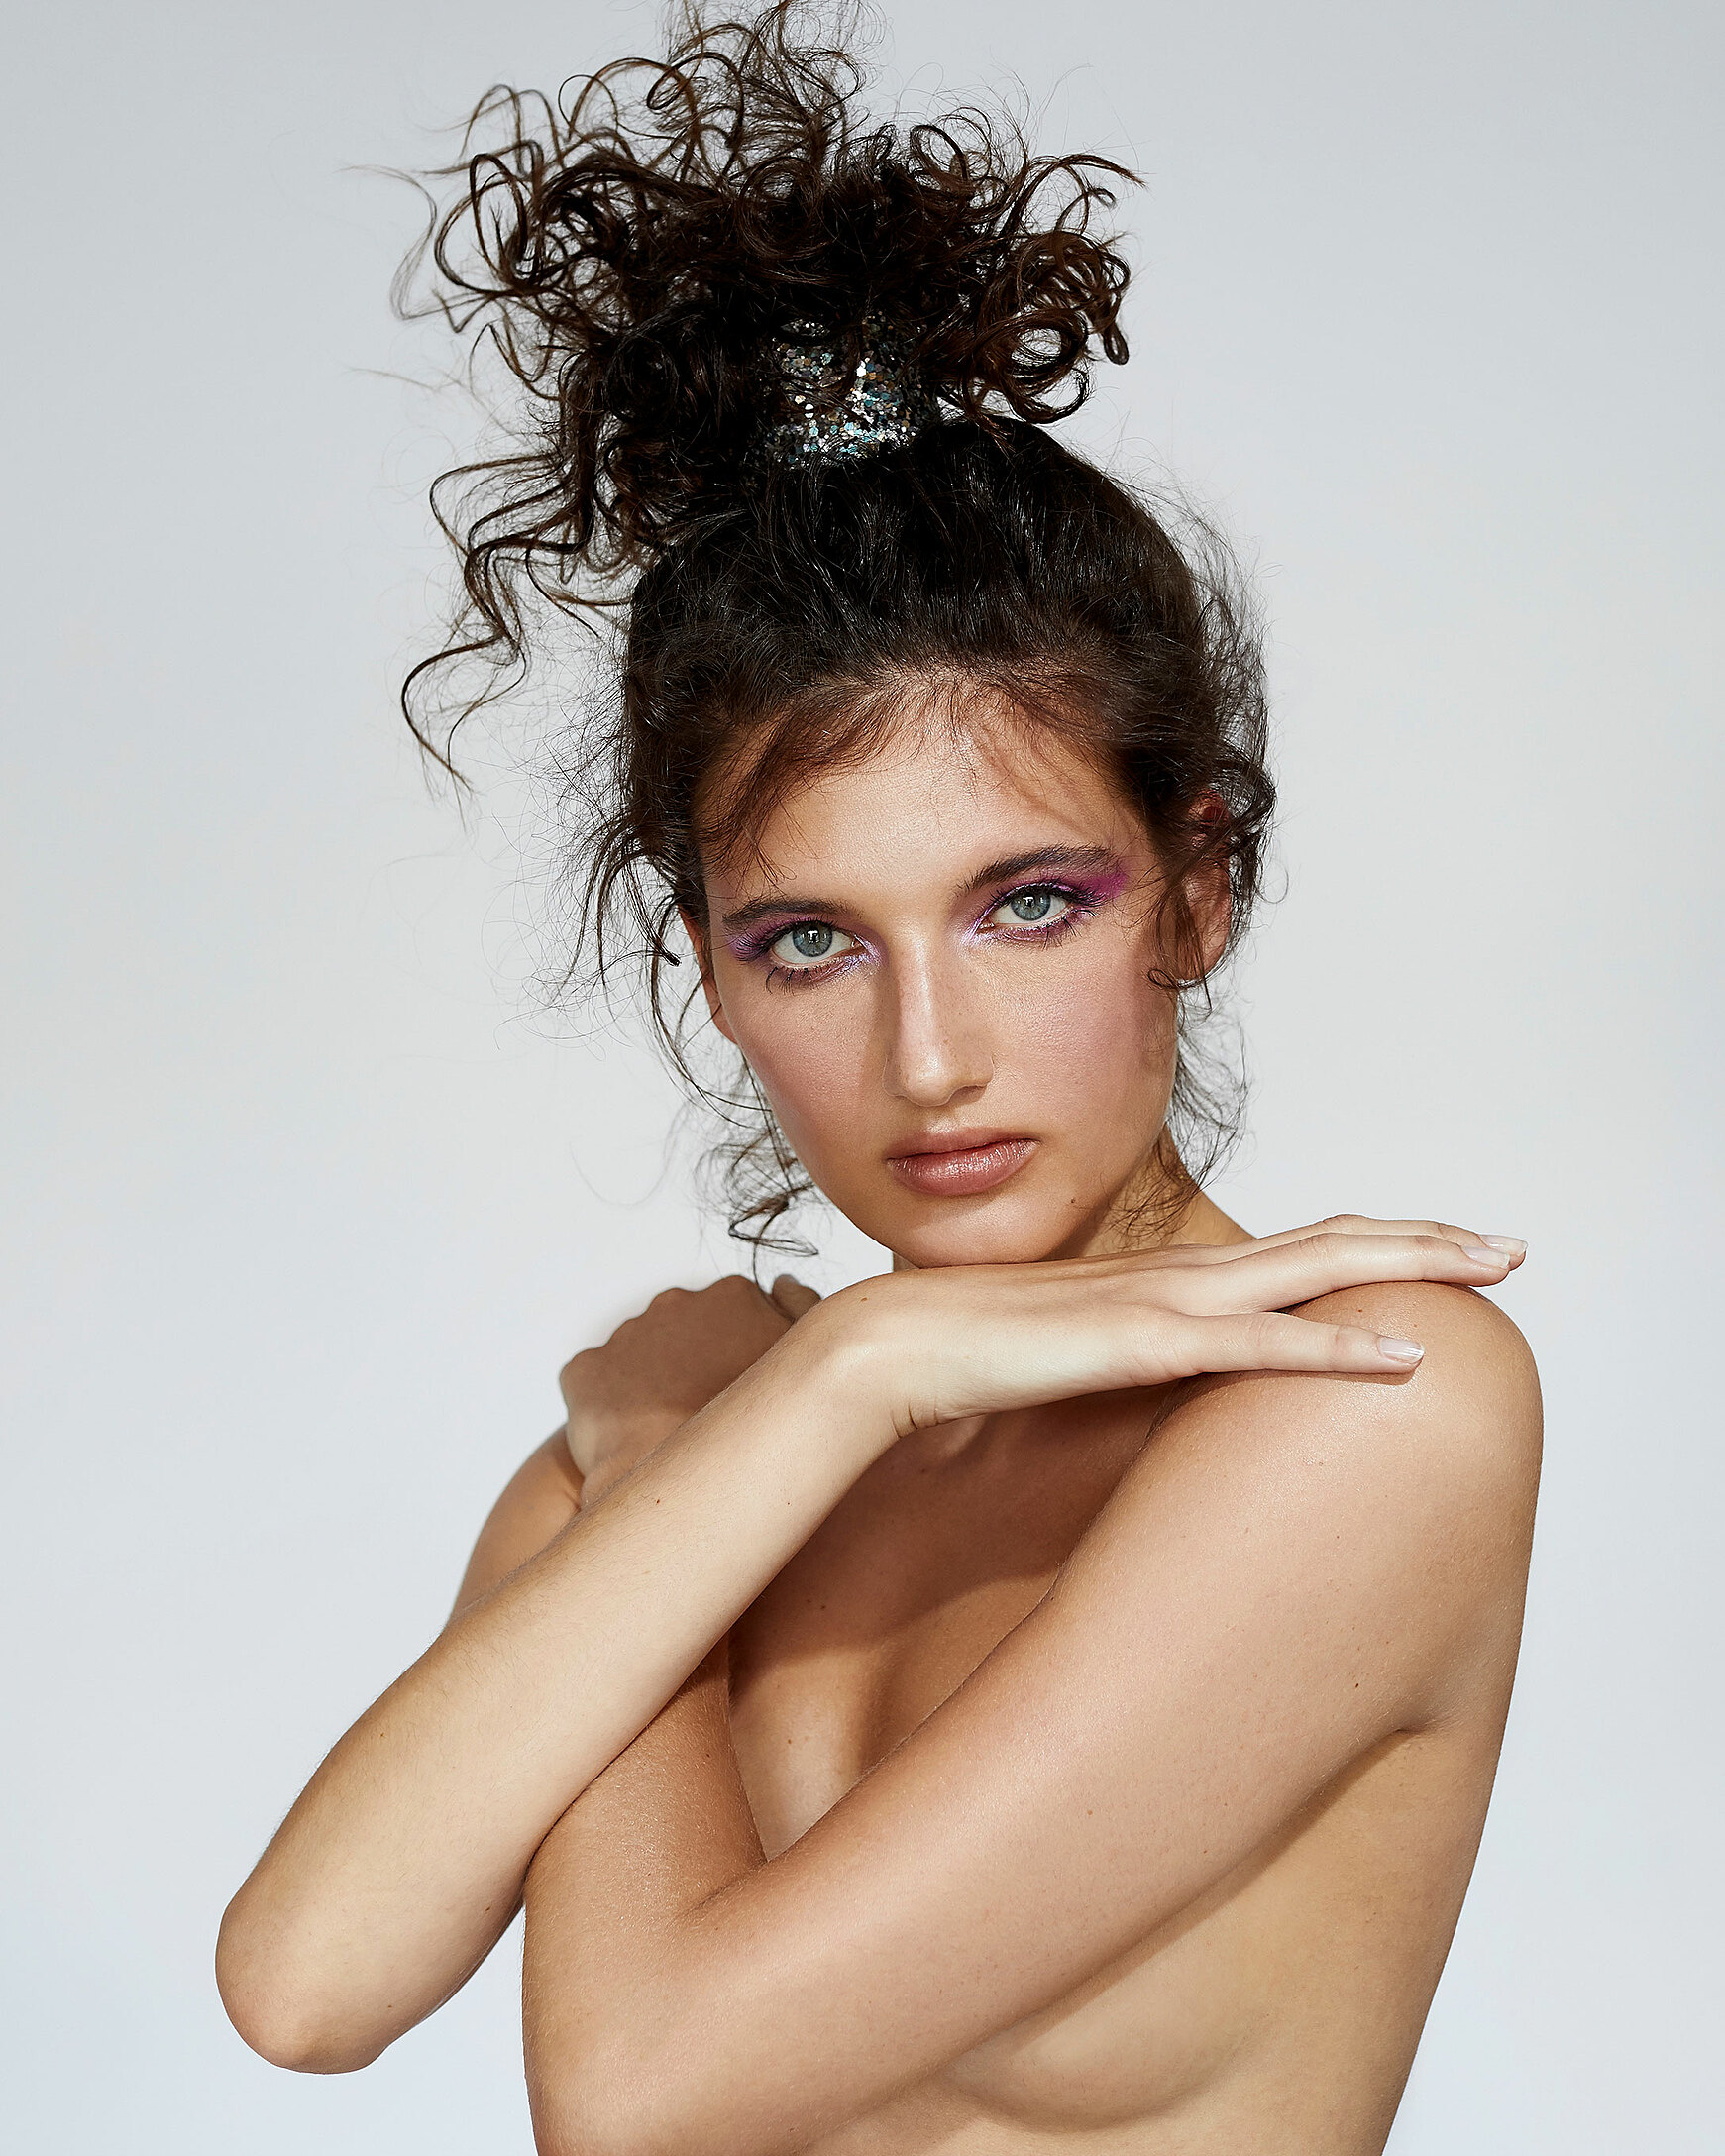 A beauty photography of a female model with dark curly hair in a bun. Her arms covering her skin.